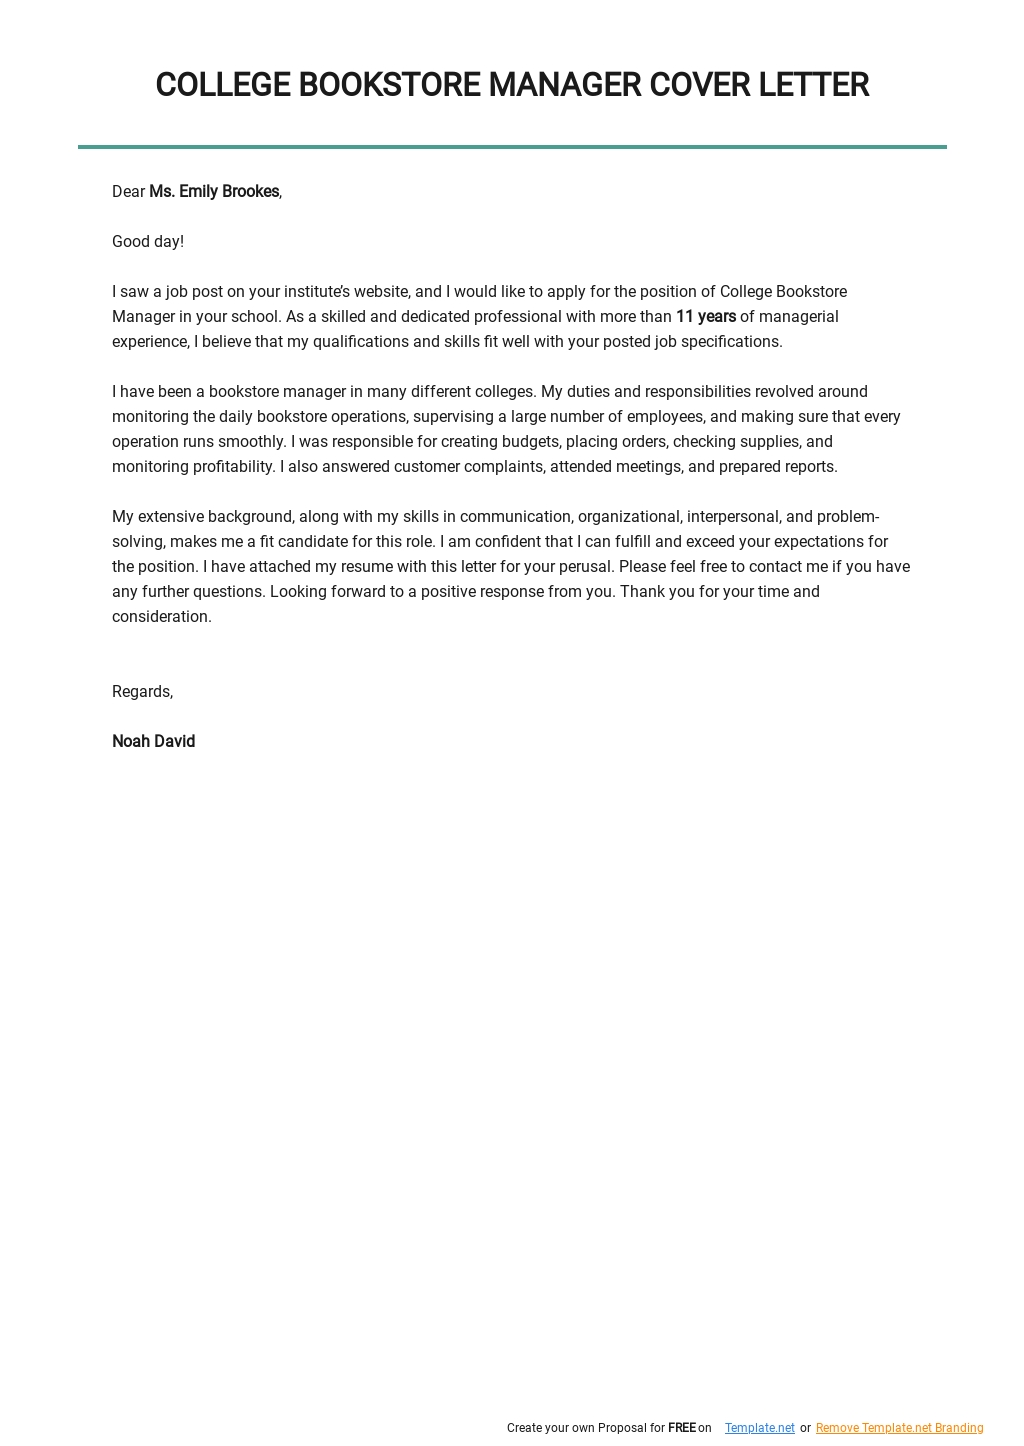 College Bookstore Manager Cover Letter Template.jpe